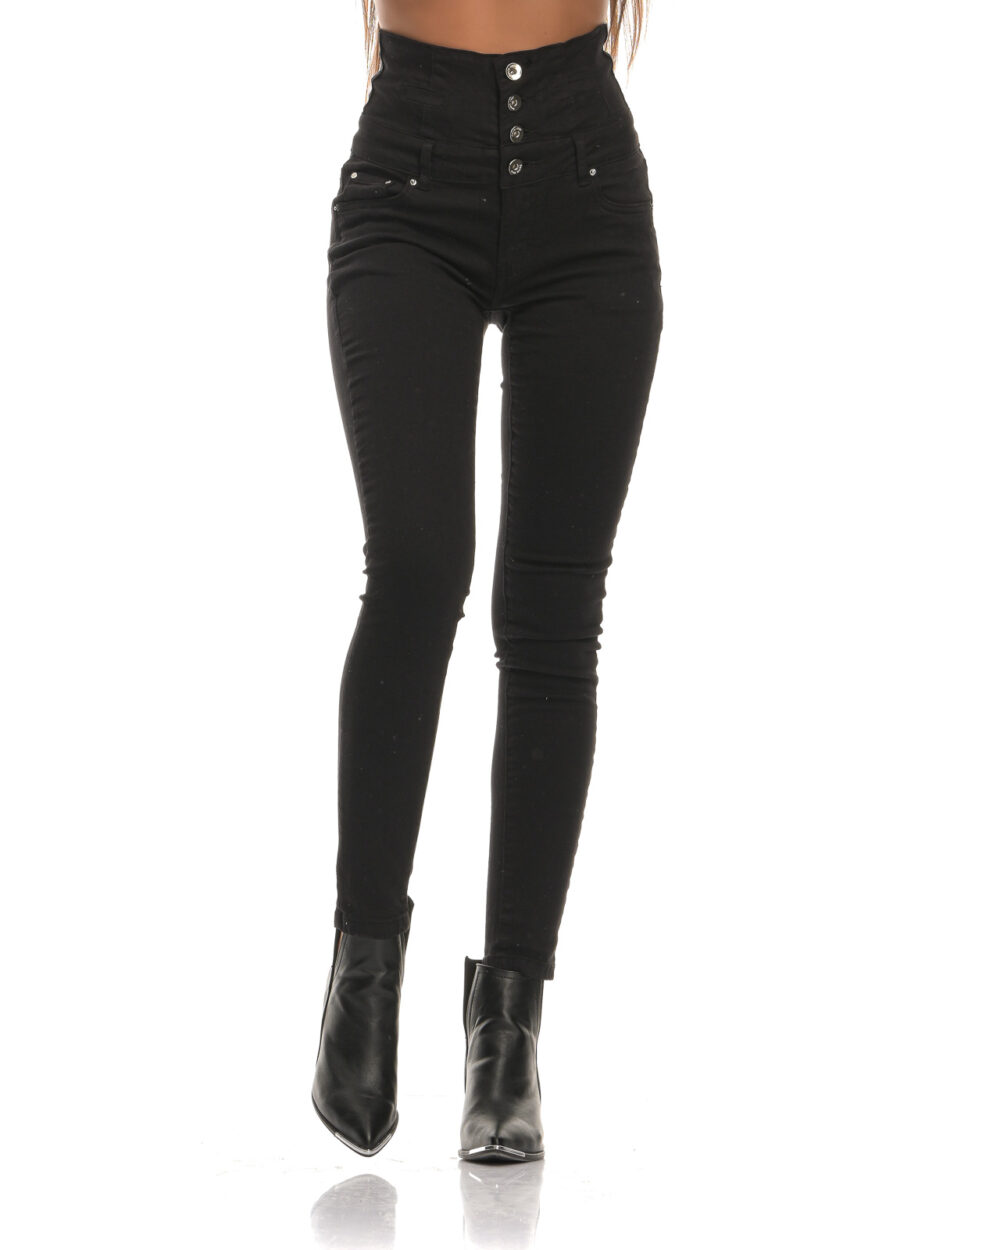 Black high-waisted elastic pants with buttons